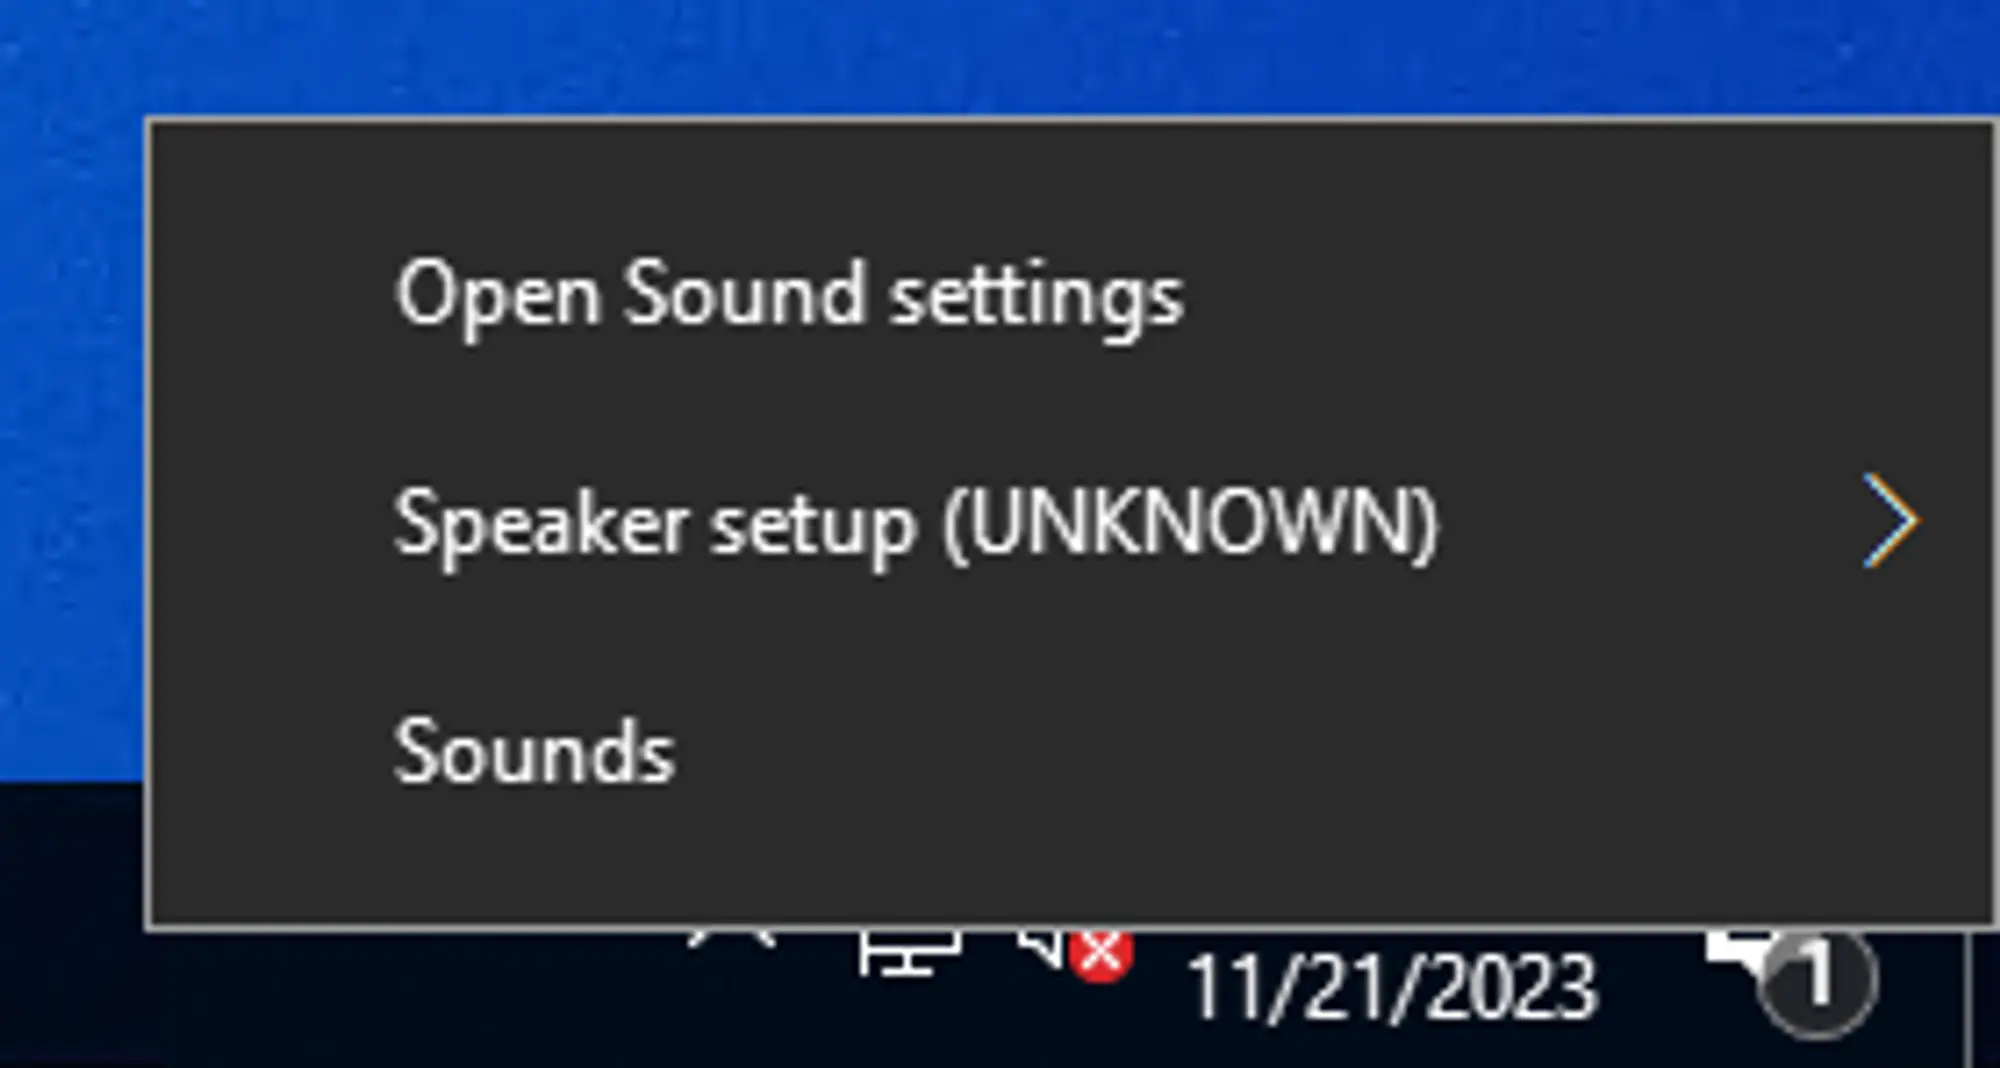 The context menu provided by Windows when clicking on the sound icon when the Windows Audio Service isn’t running. From top to bottom the options are &quot;Open Sound settings&quot;, &quot;Speaker setup (UNKNOWN)&quot;, and &quot;Sounds&quot;.